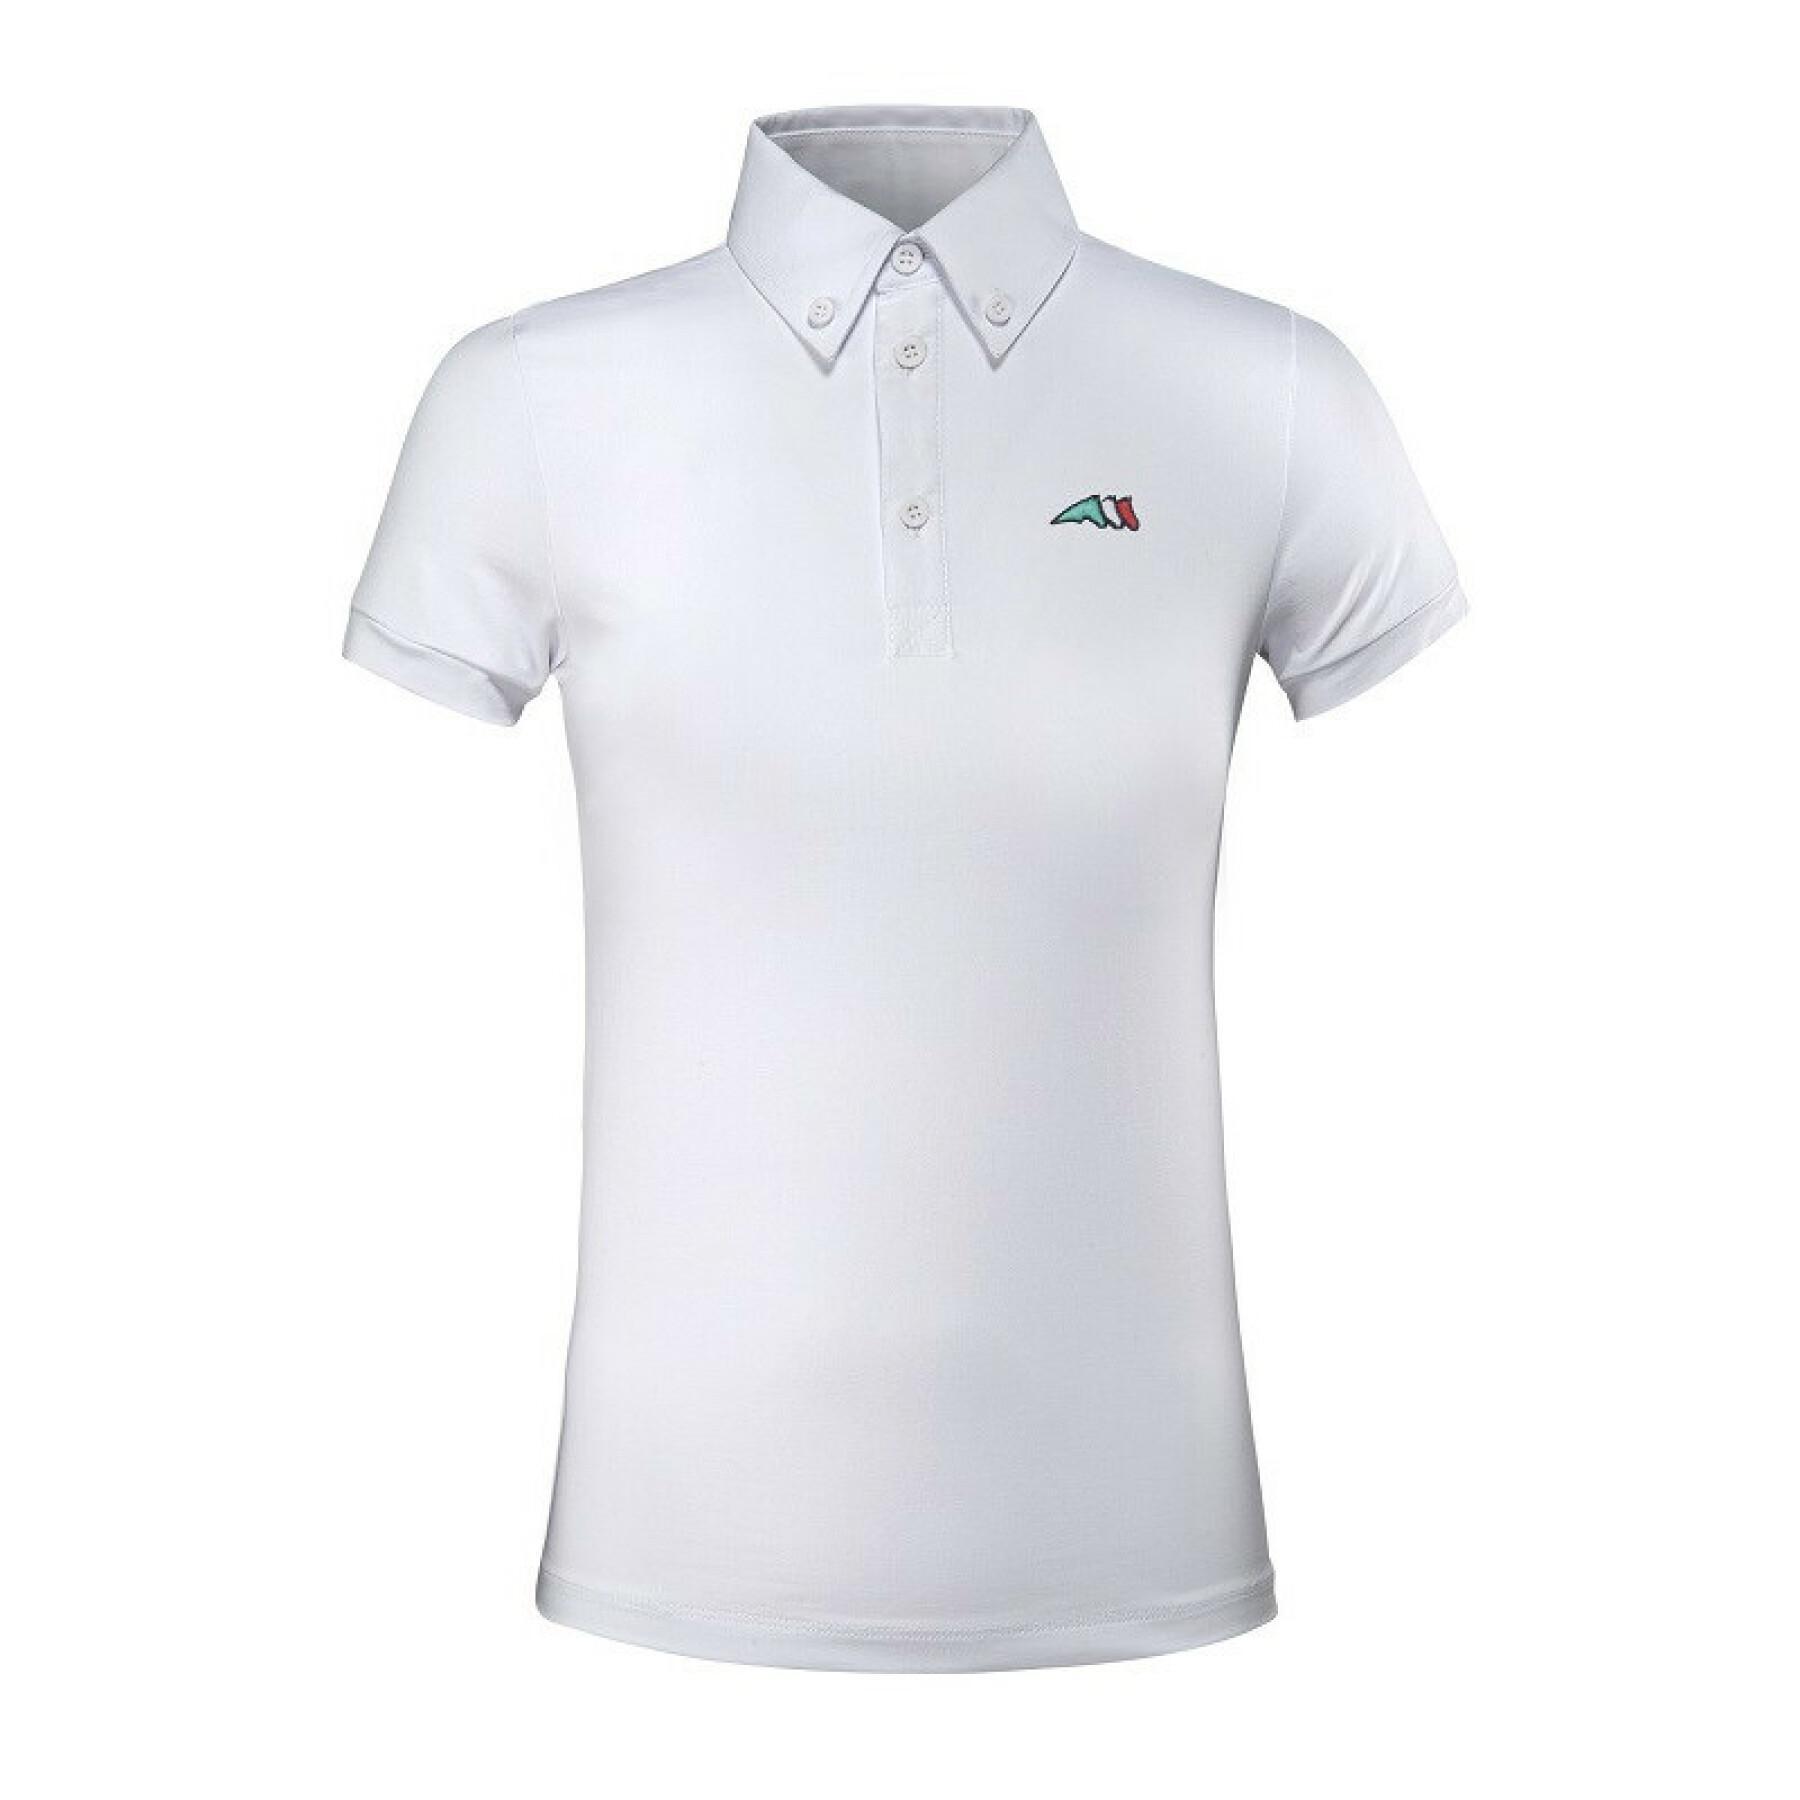 Children's riding polo shirt Equiline